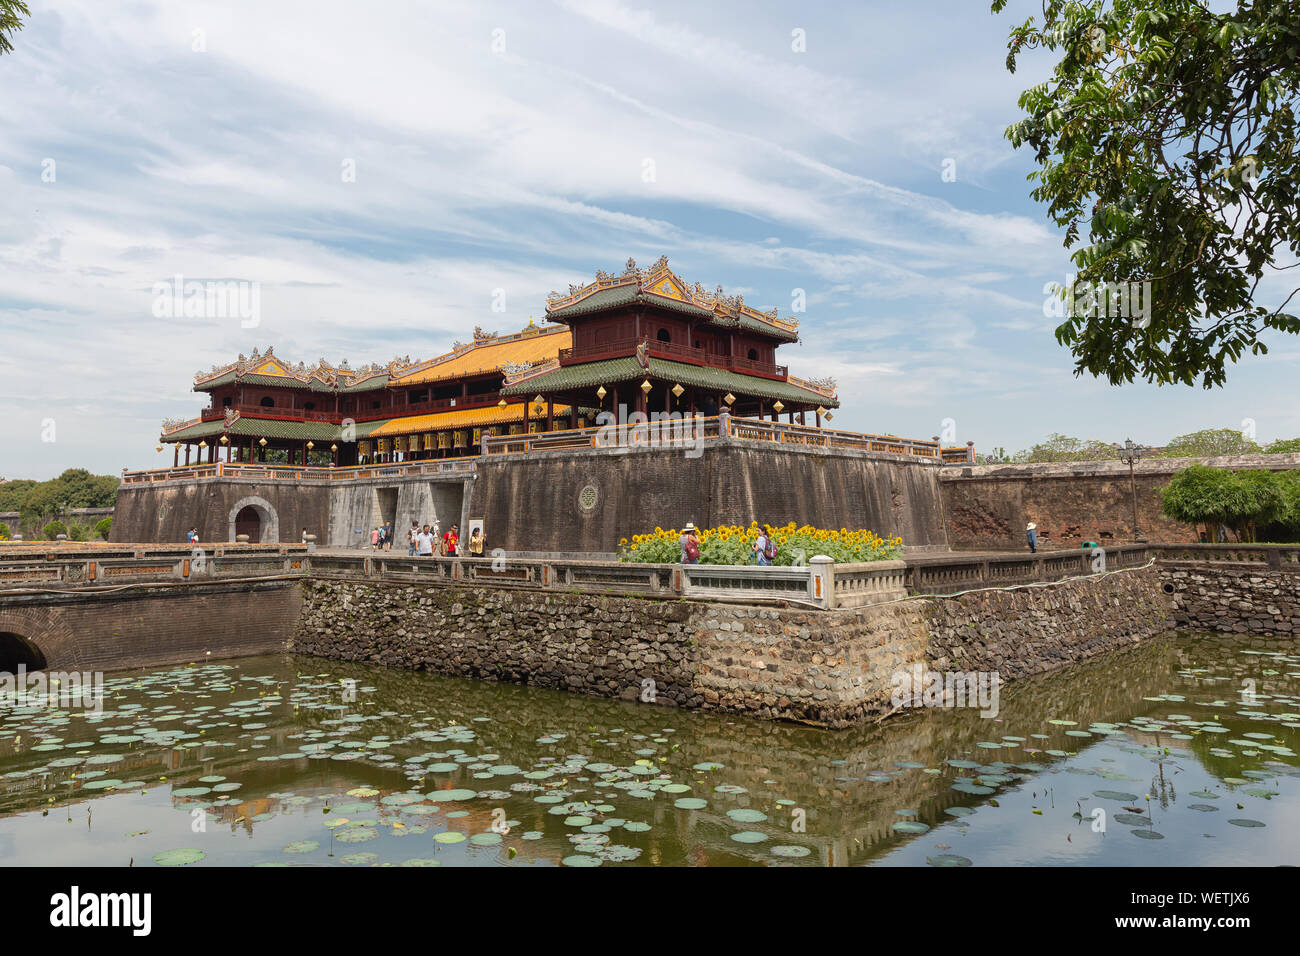 Entrance to the Imperial City, Hue, Thua Thien Hue Province, Vietnam, Asia Stock Photo